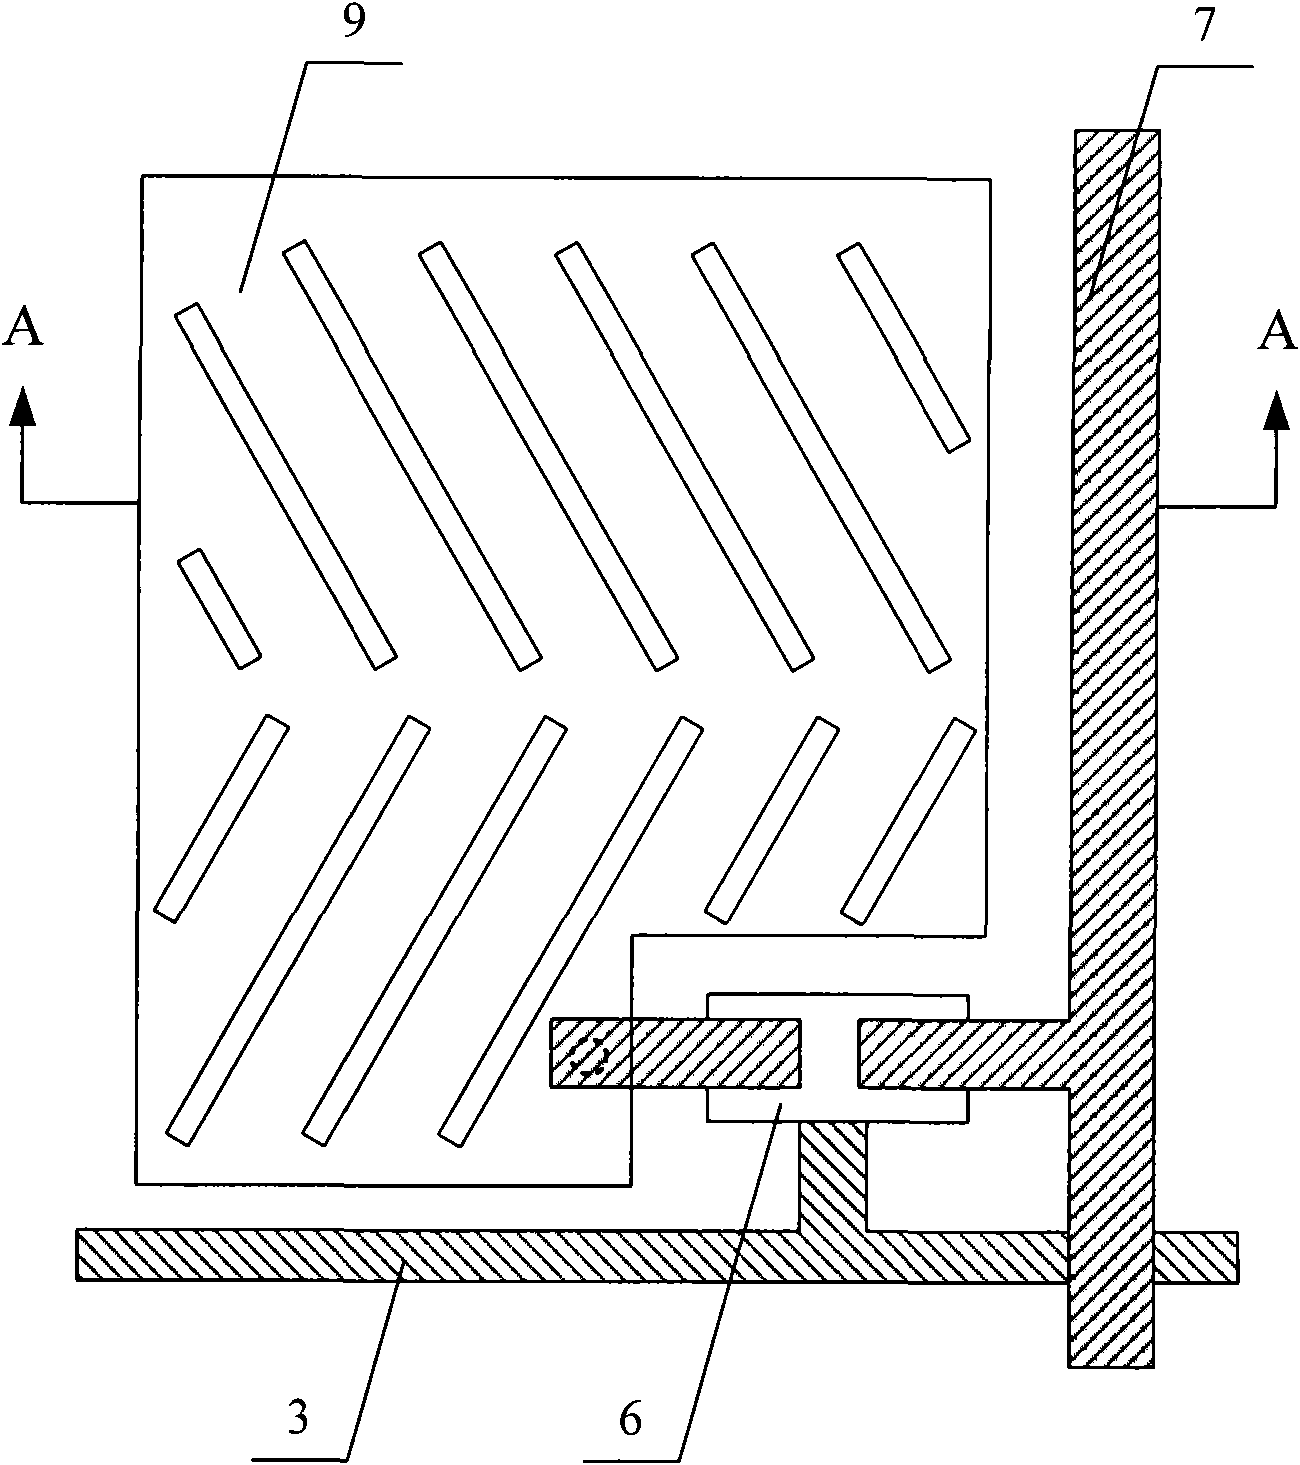 Array substrate of liquid crystal display device